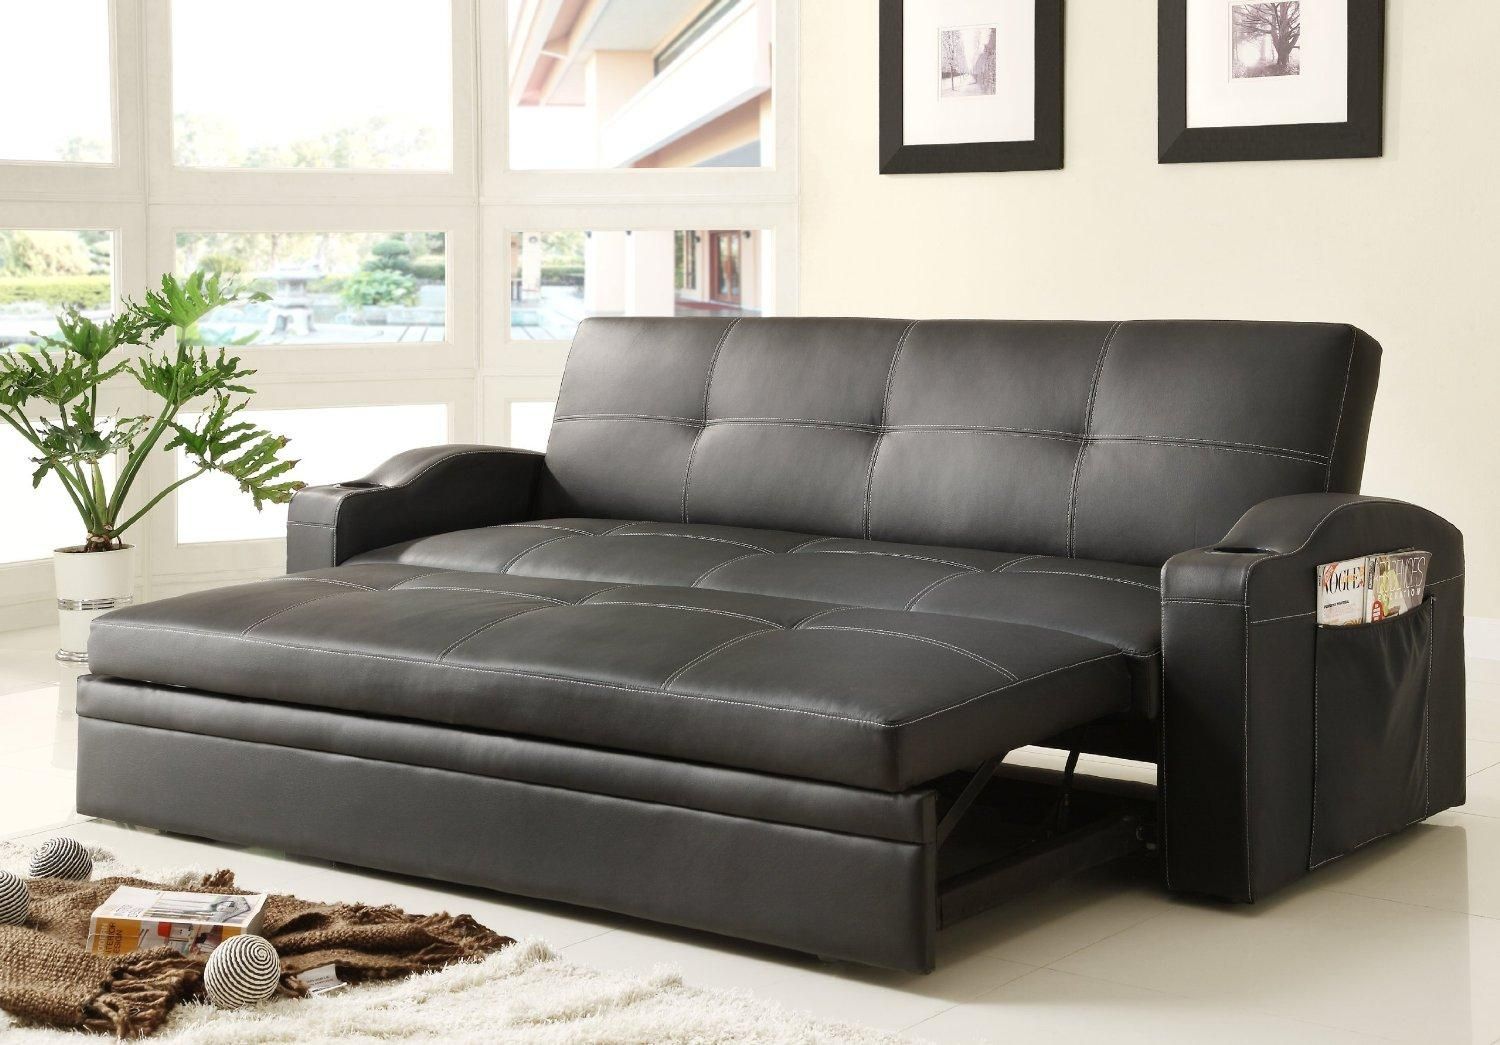 Furniture. Black Leather Sectional Sofa With Chaise And Square Throughout Black Leather Sectional Sleeper Sofas (Photo 16 of 21)